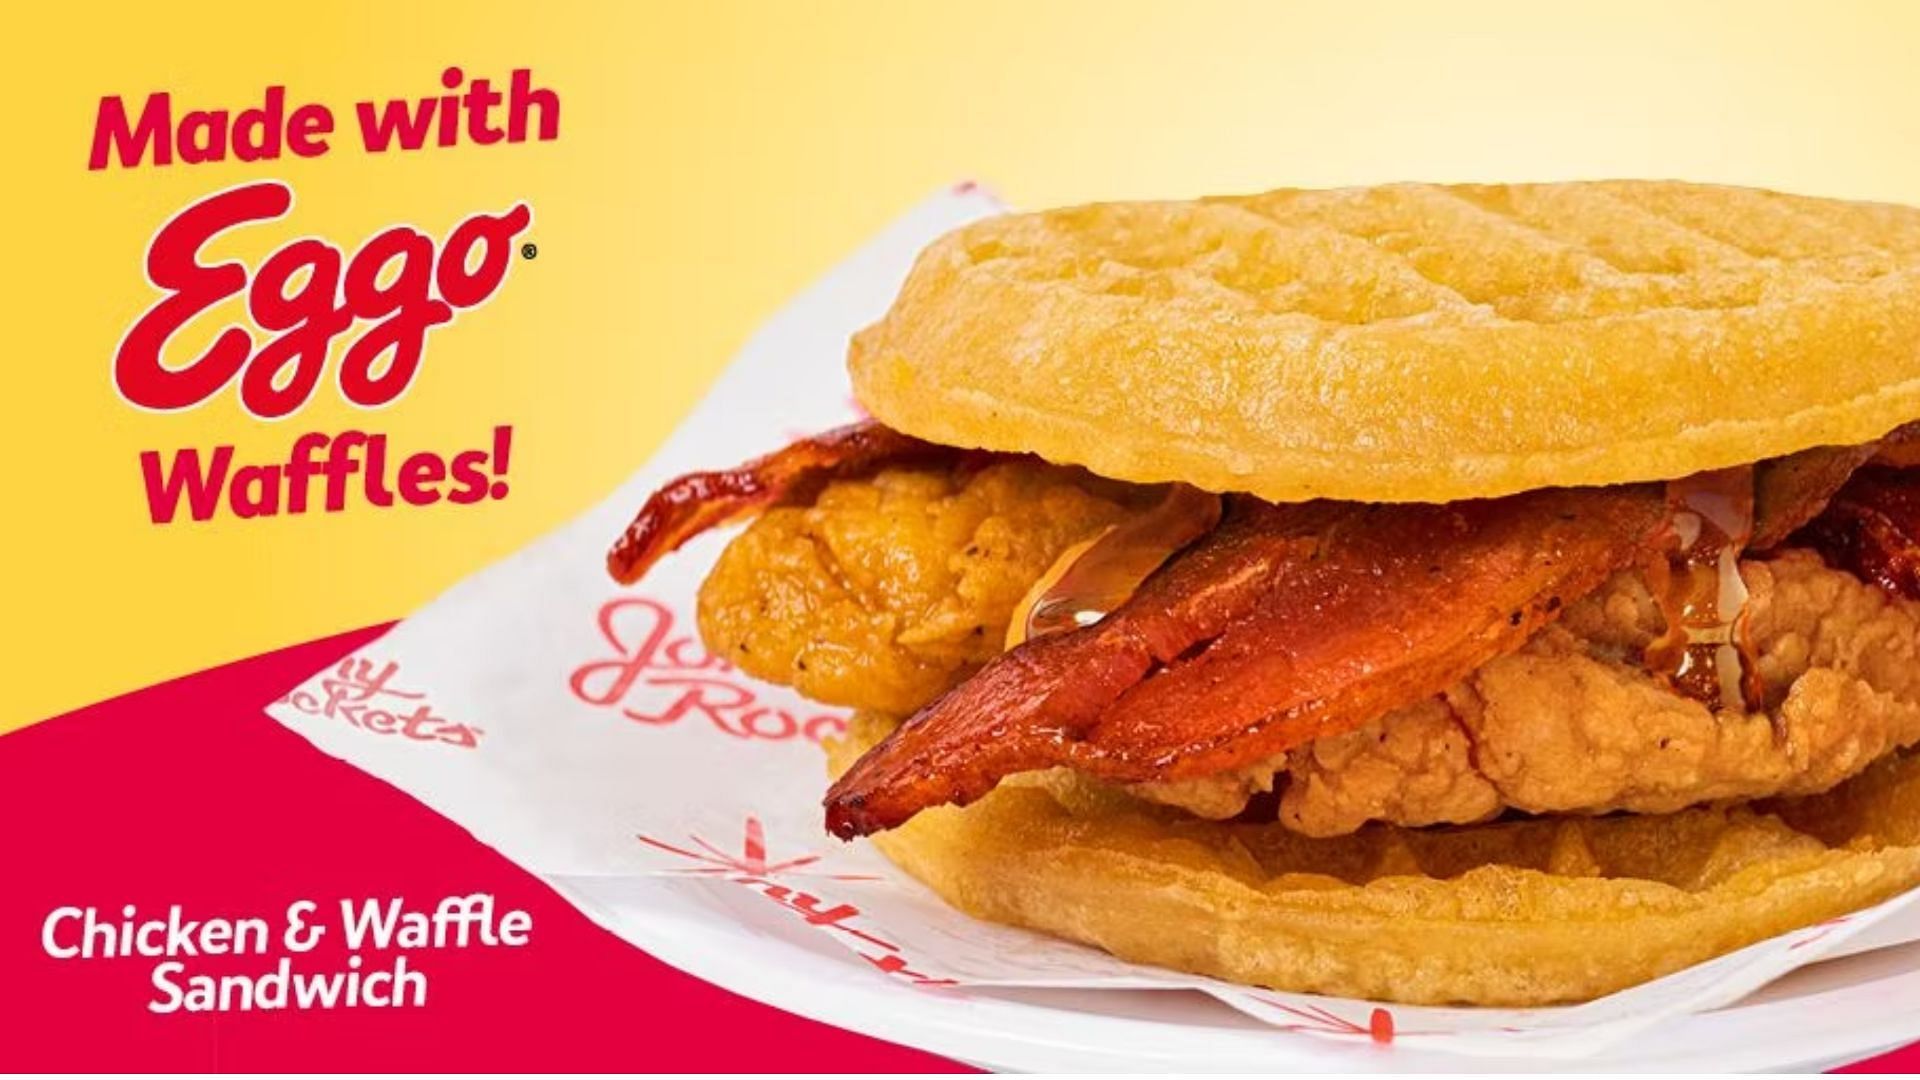 New Eggos Chicken and Waffle Sandwich (Image via Johnny Rockets)